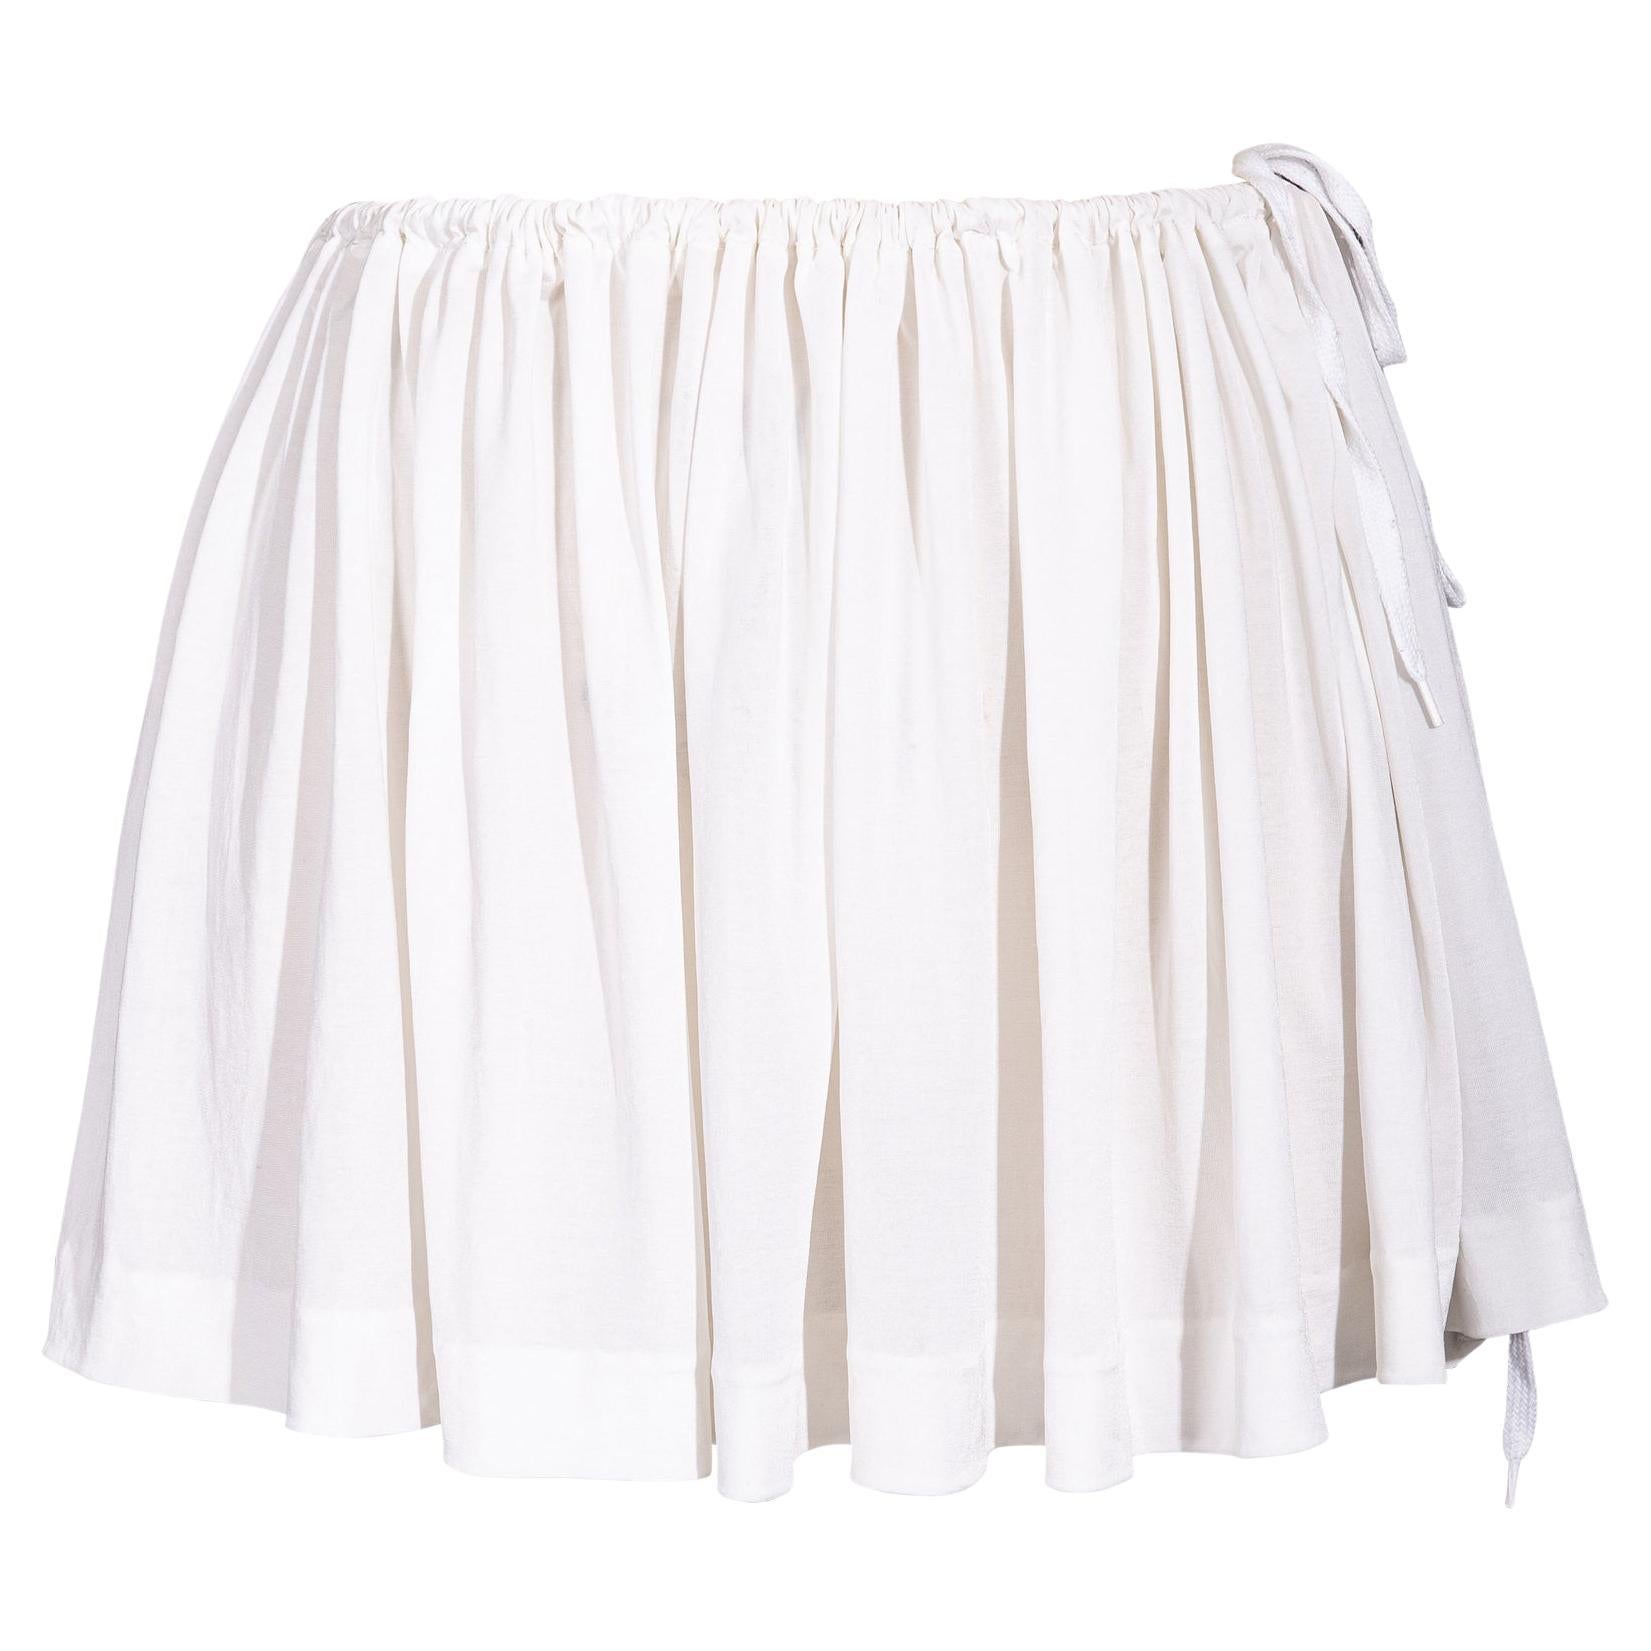 S/S 1988 Vivienne Westwood White Mini Skirt with Removable Bustle